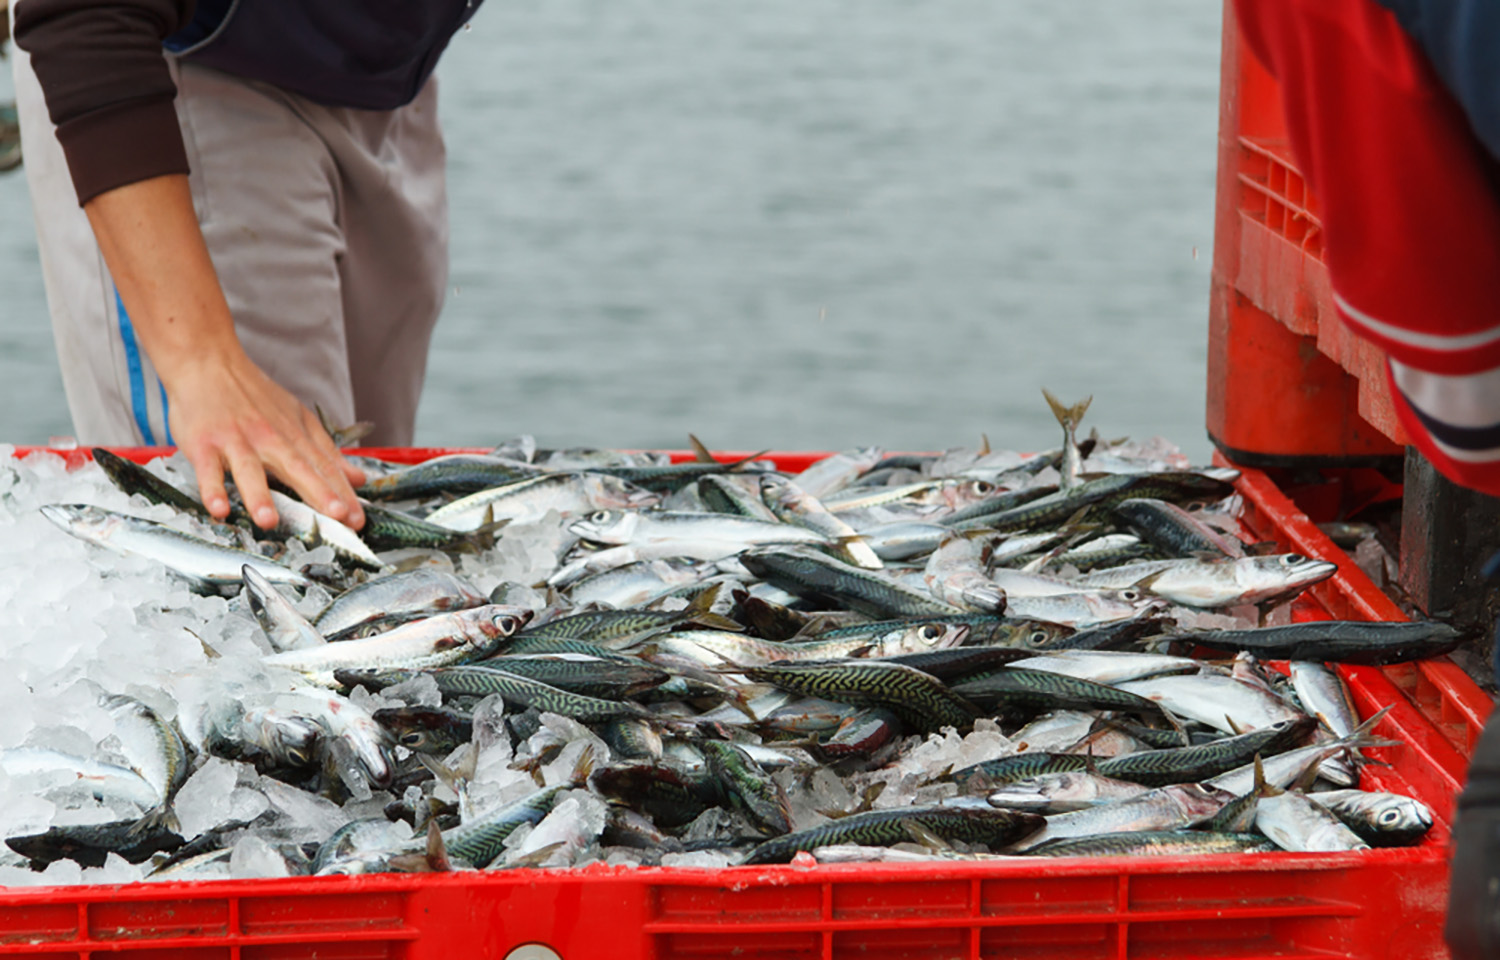 Fisheries representatives call on EU to take action against Norwegian fishing practices